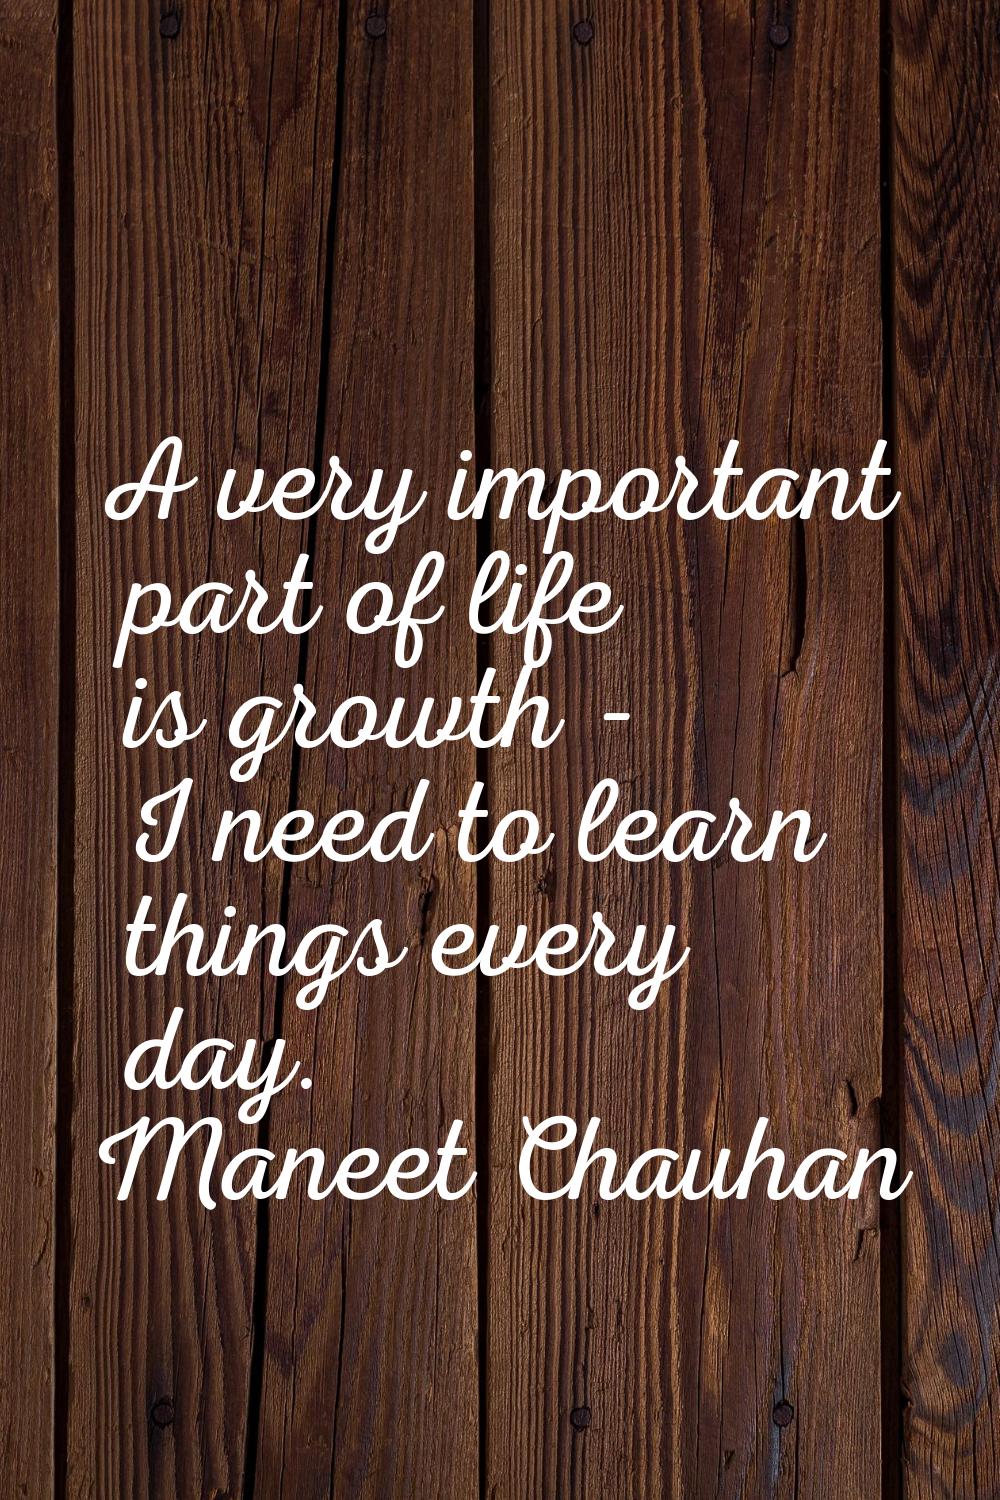 A very important part of life is growth - I need to learn things every day.